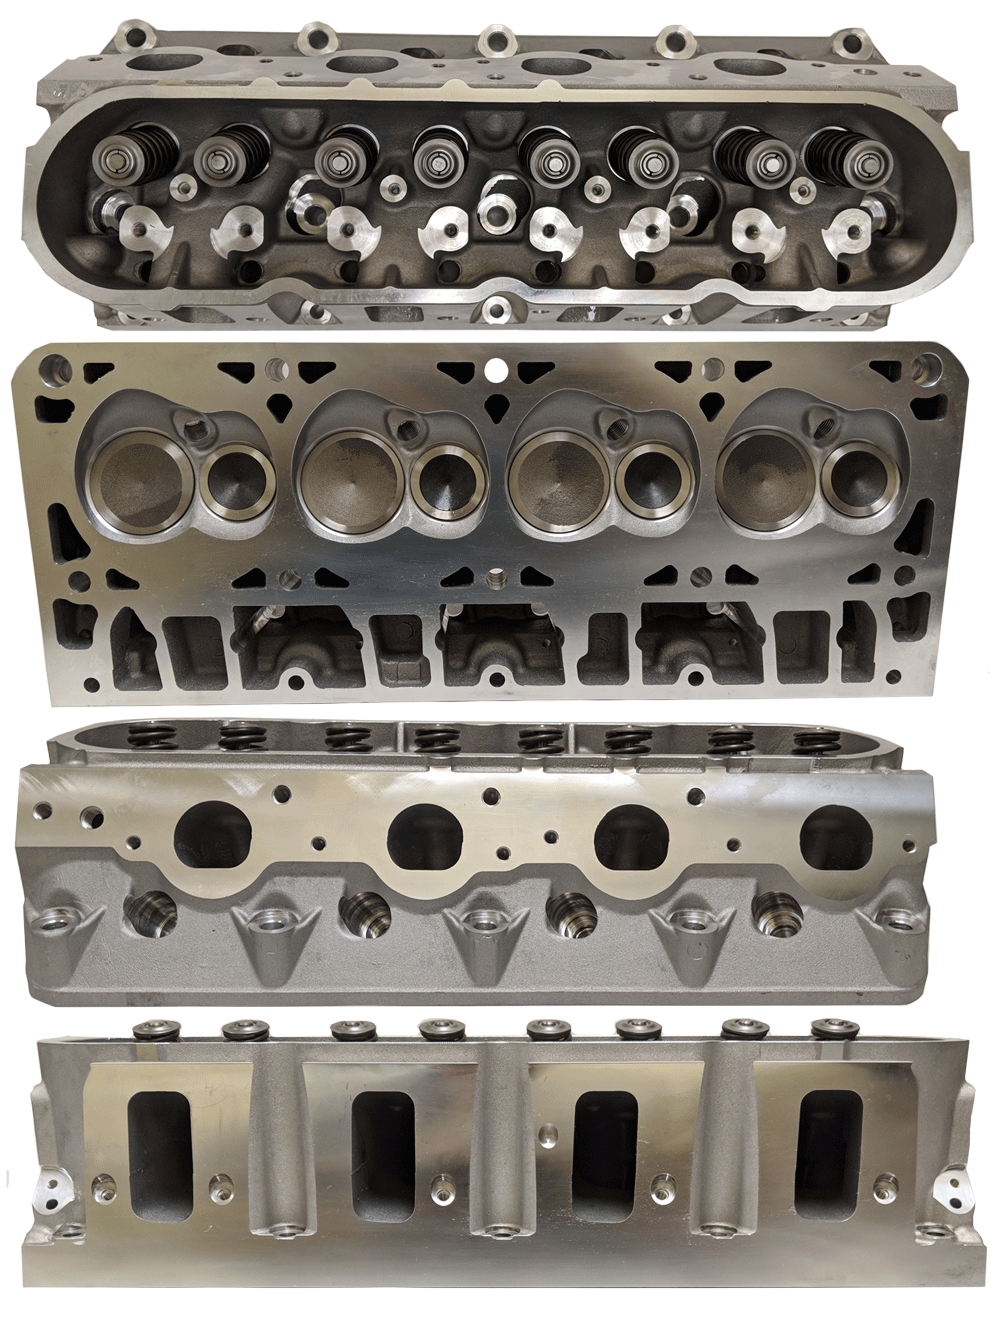 Gm Gmc Cylinder Head Ls3 6.0 6.2 Assembly Pair # 364, 5364 ,823 New